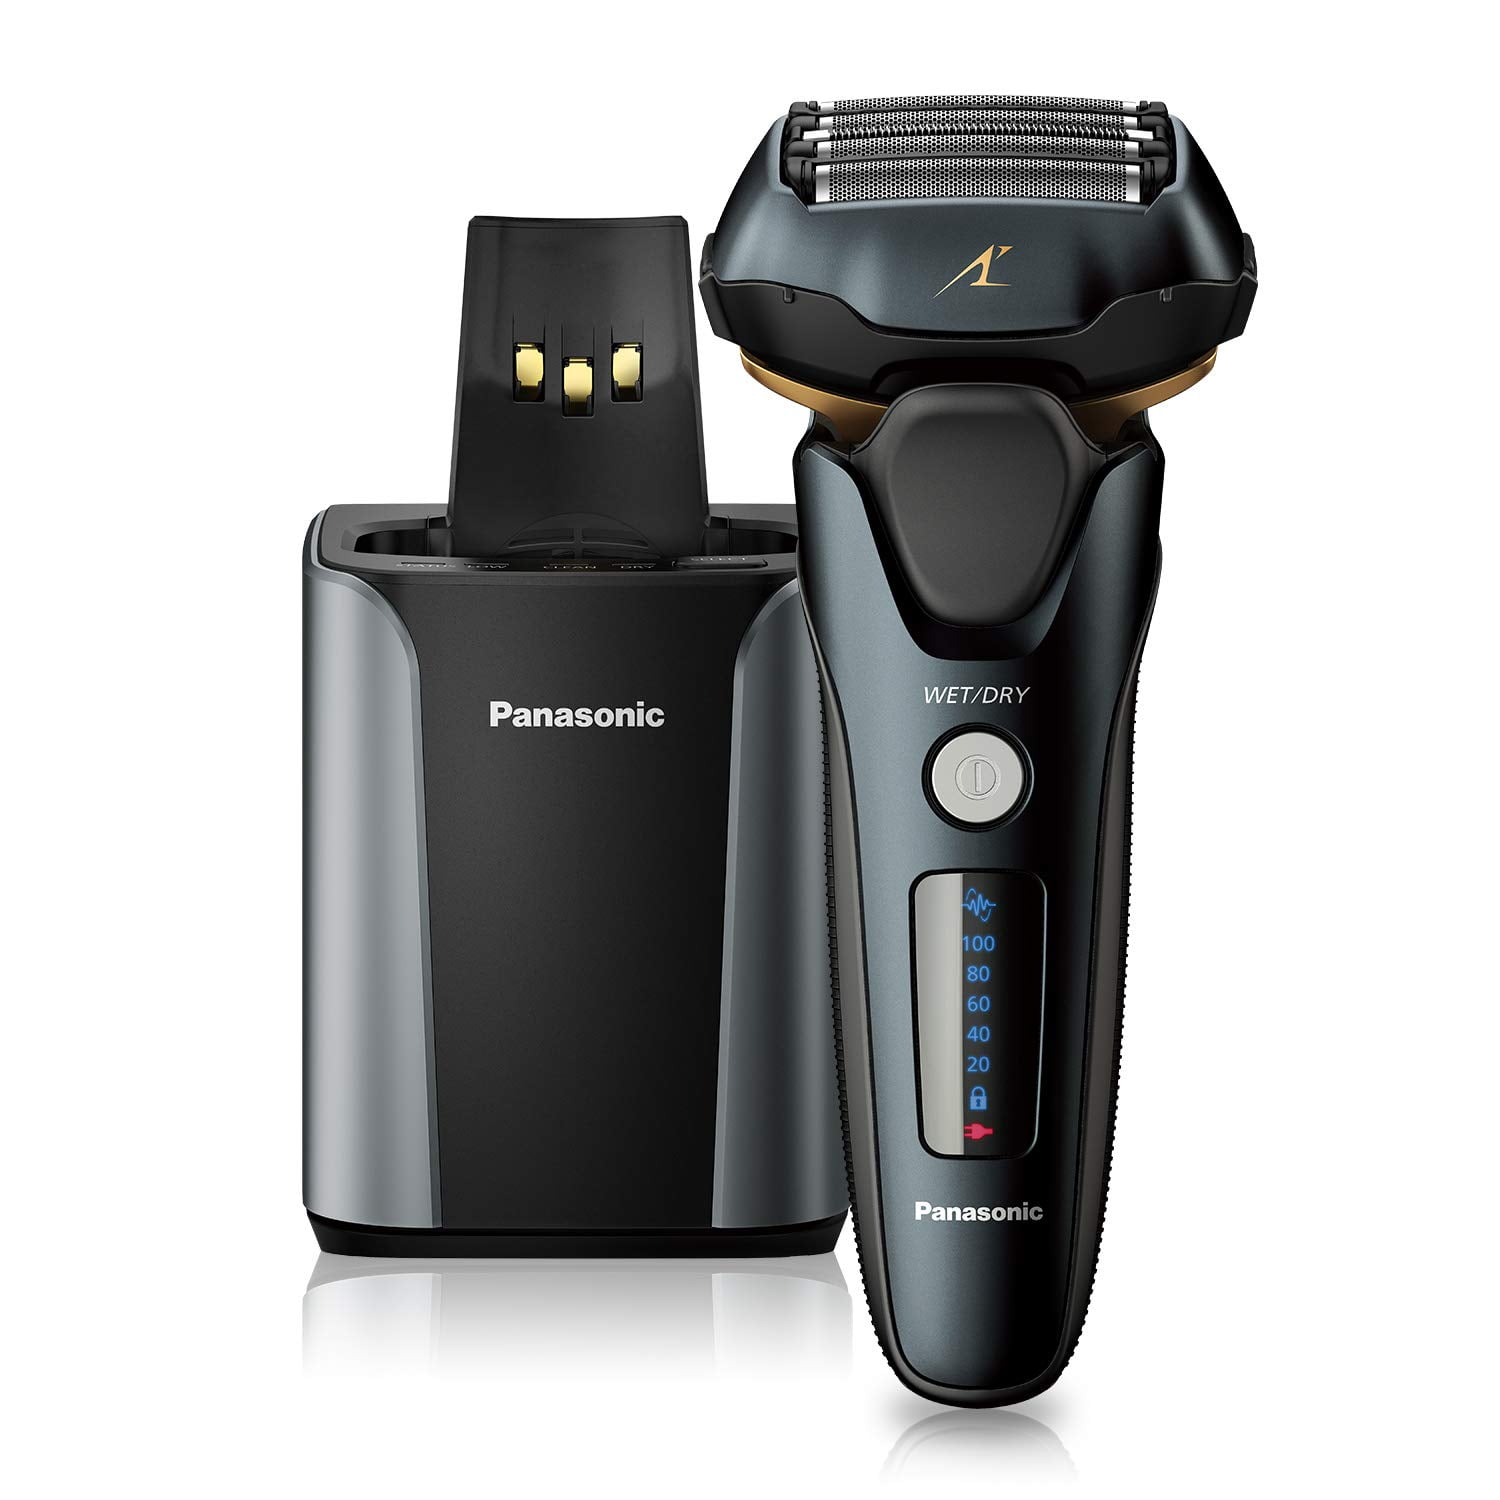 Panasonic Electric Razor for Men, Electric Shaver, ARC5 with